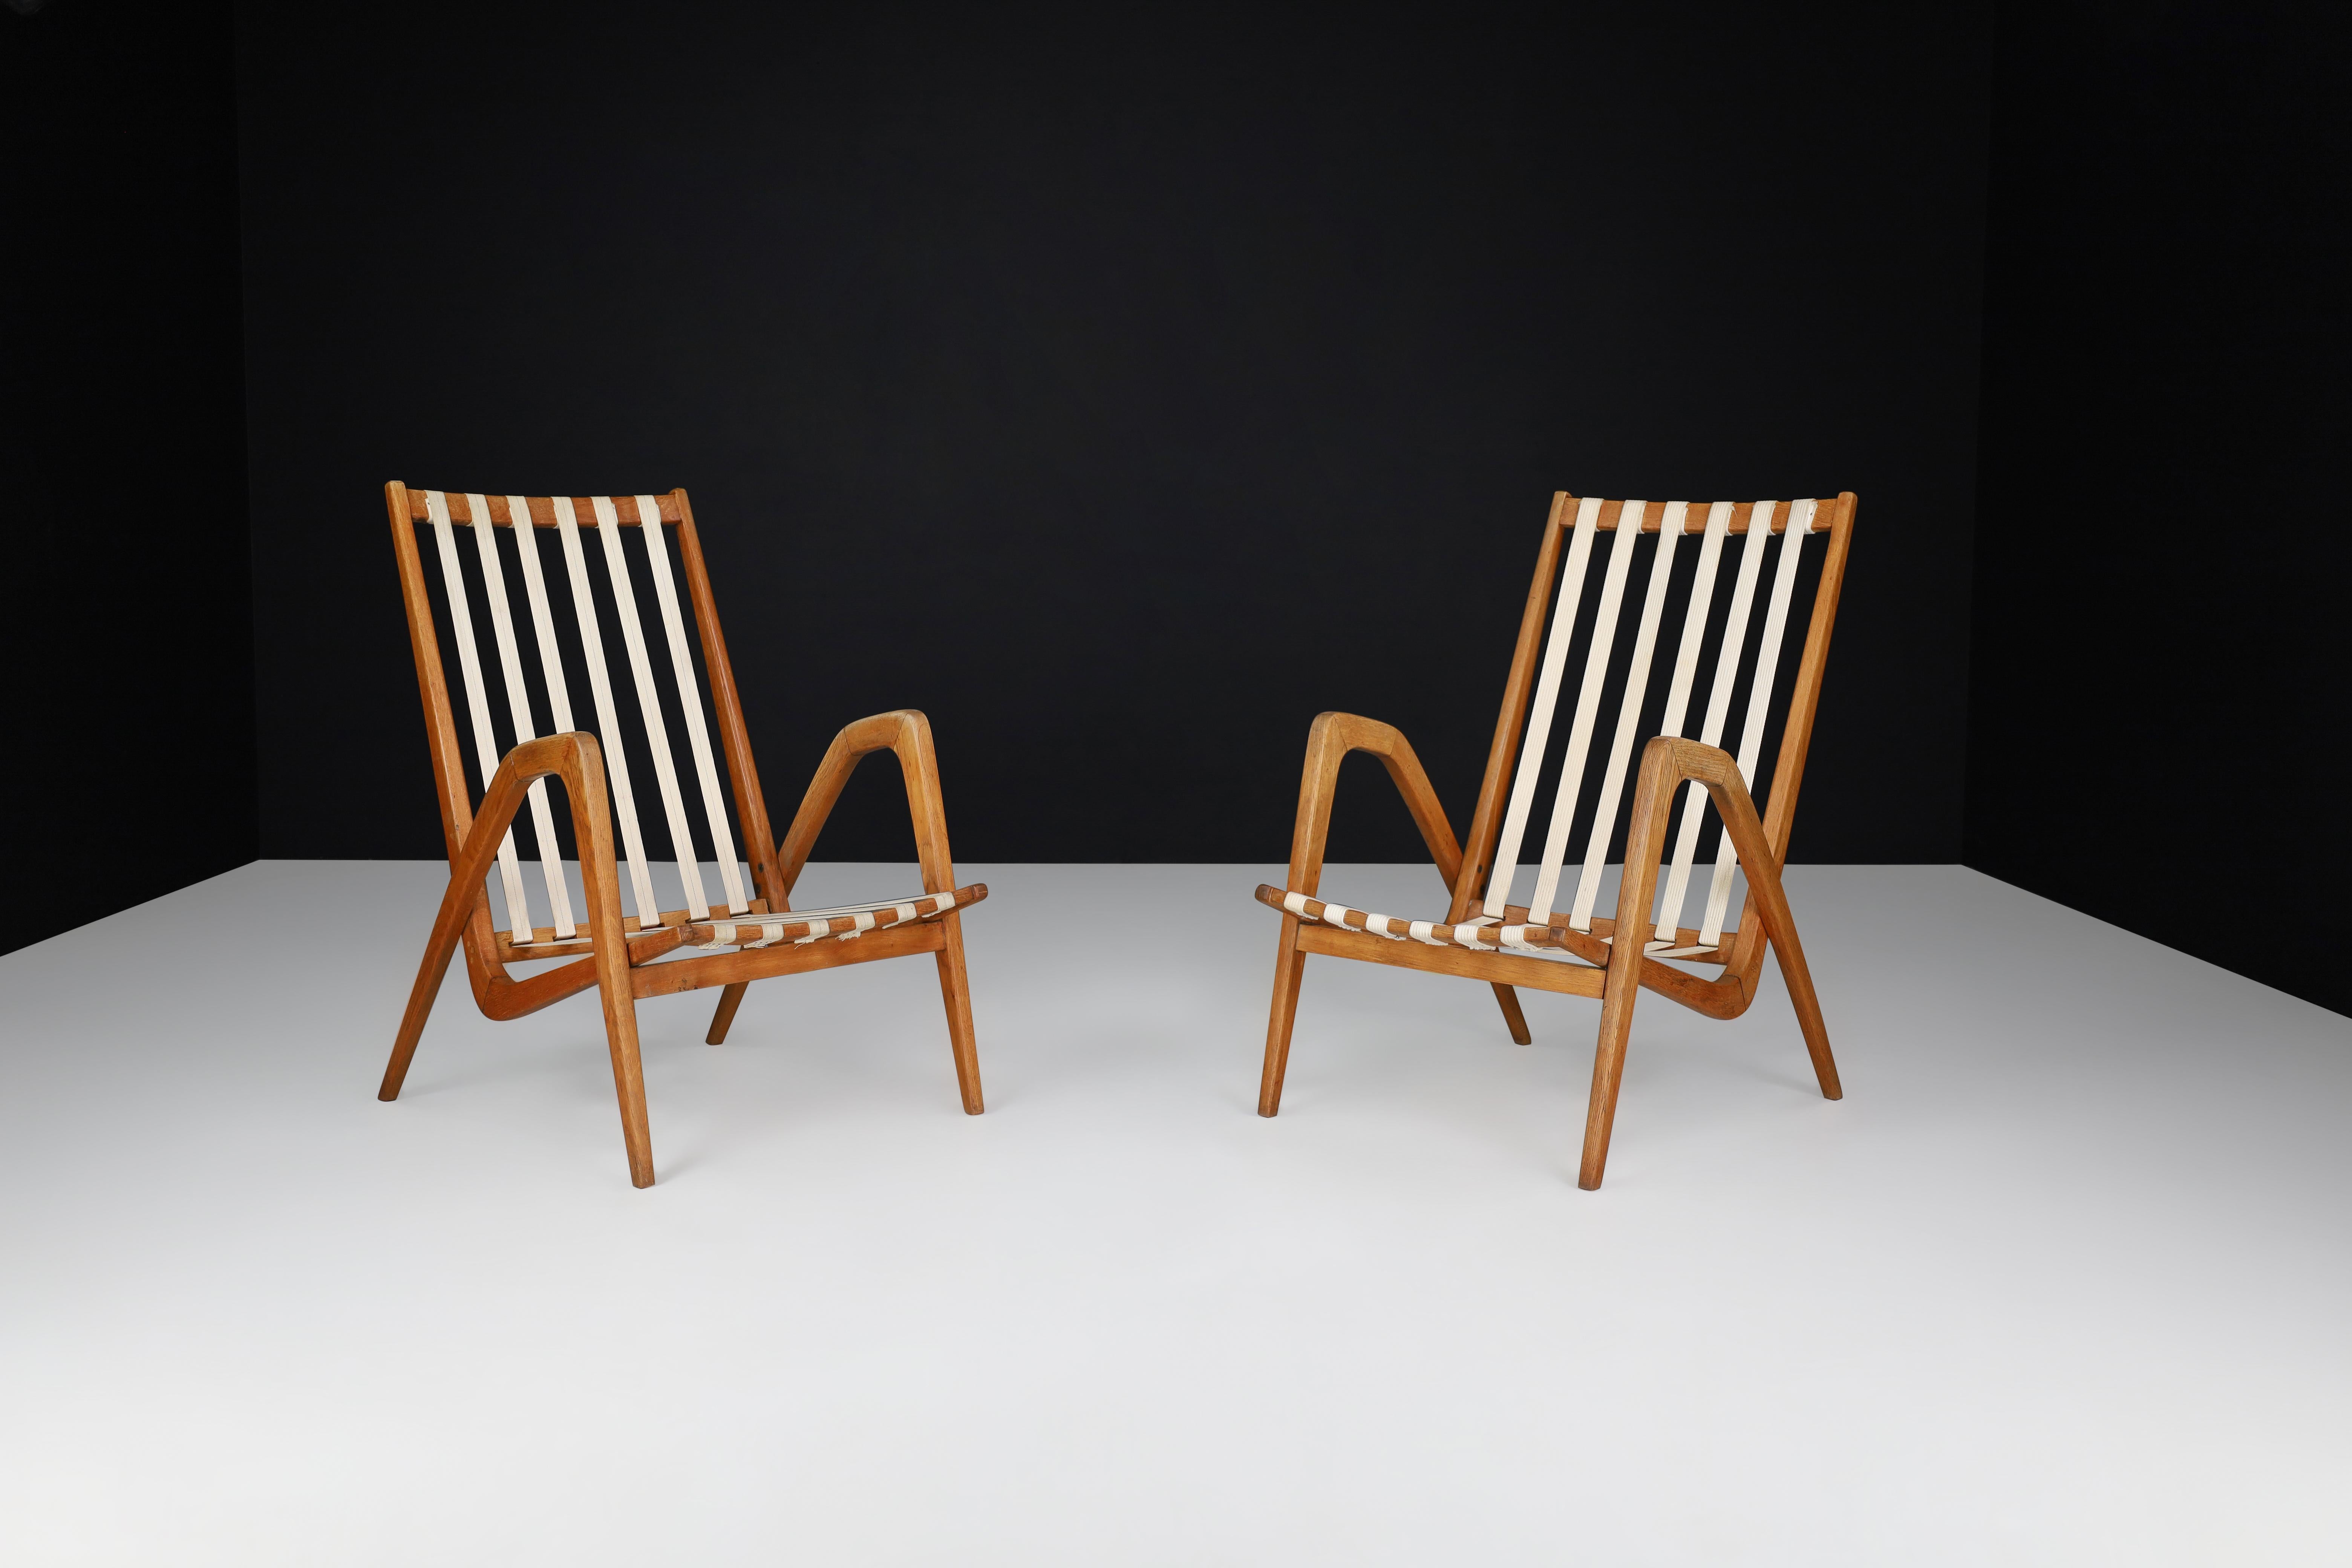 Jan Vanek Oak Lounge Chairs, 1940s

Sculptural lounge chair in oak and linen straps designed by Jan Vaneck in the 1940s. The gentle corners of the frame repeated in the armrests make this set look sculptural and have a simplistic, functional